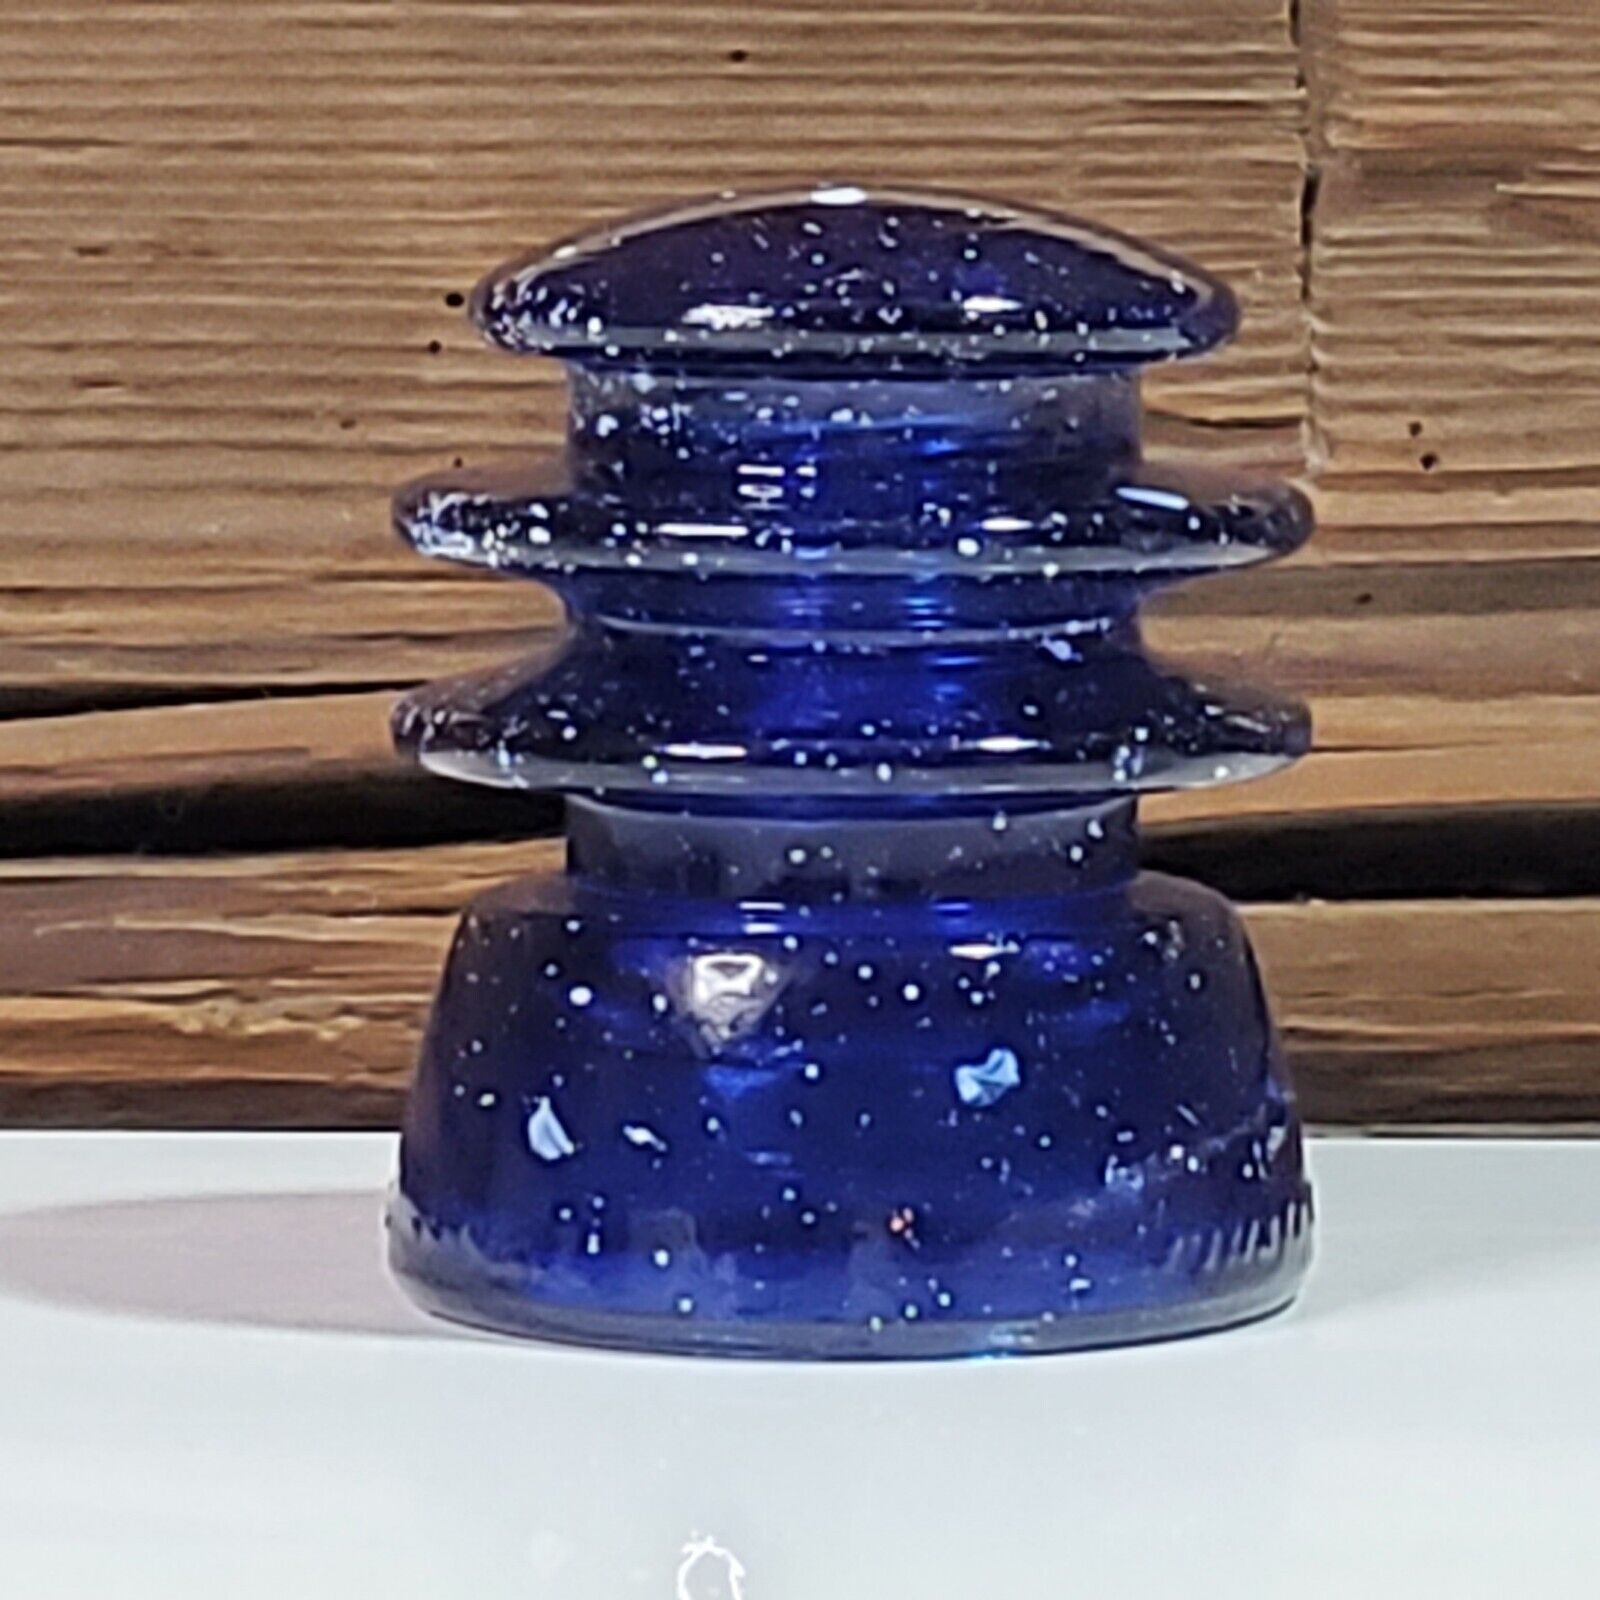 Vintage Glass Insulator Stained Cobalt Blue With Stars Decorative Glass Antique 